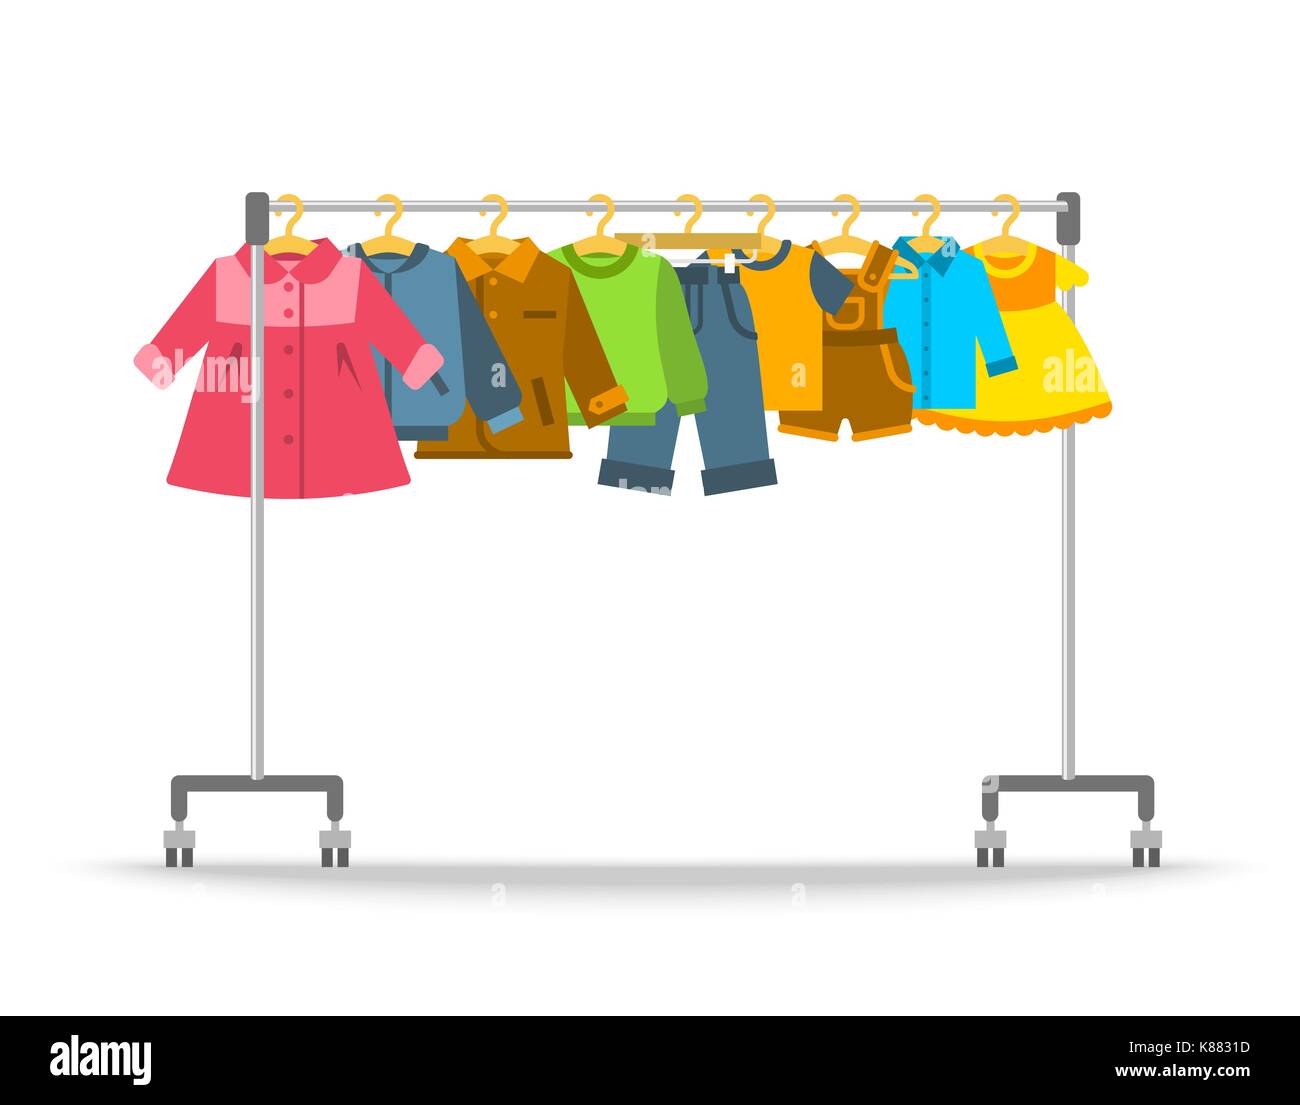 Kids clothes on hanger rack. Flat style vector illustration. Casual little  children apparel hanging on shop rolling display stand. Boys and girls outf  Stock Vector Image & Art - Alamy